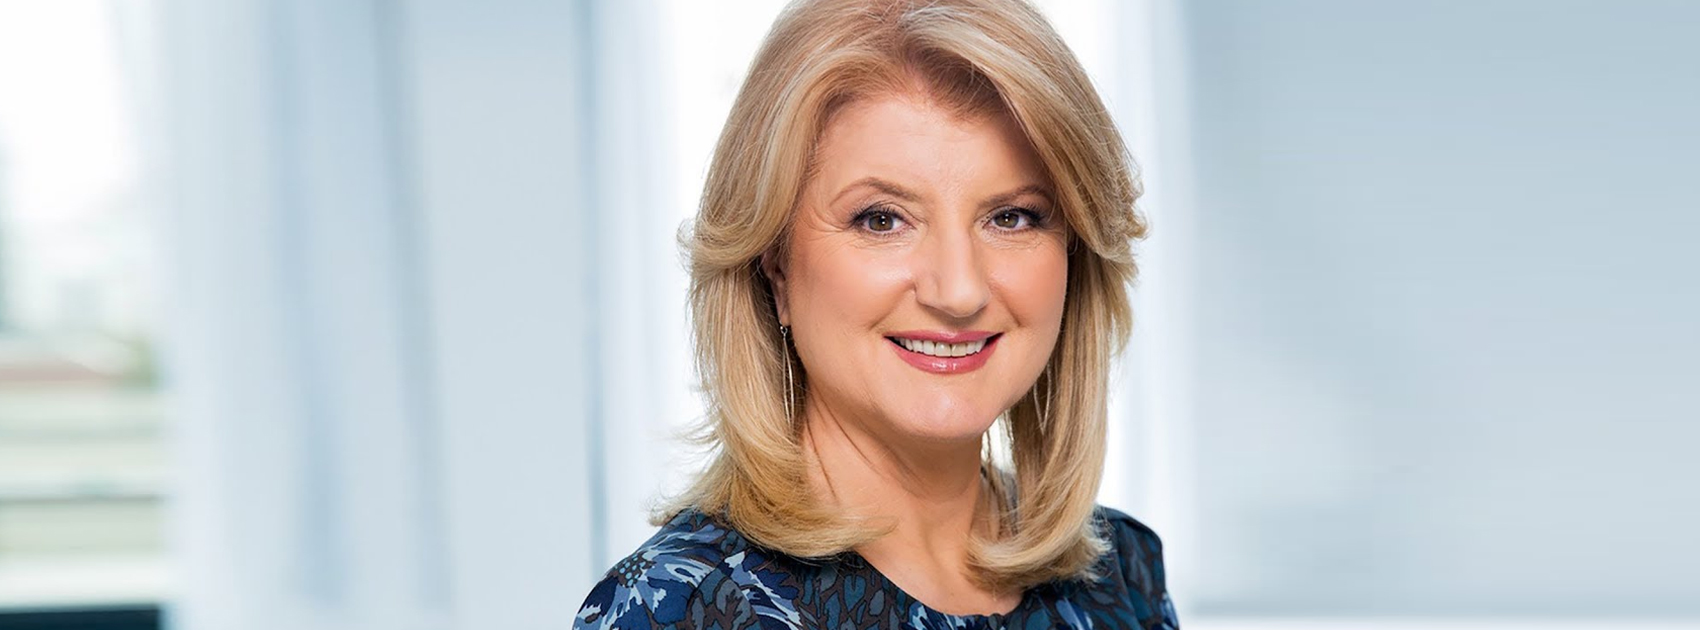 Arianna Huffington Unknown Facts,Arianna Huffington Amazing Facts, Arianna Huffington Facts, Arianna Huffington Facts 2019, Arianna Huffington Interesting Facts, Arianna Huffington Latest News, Arianna Huffington Success Story,Surprising Facts About Bill Gates,Interesting Facts 2019, startup stories